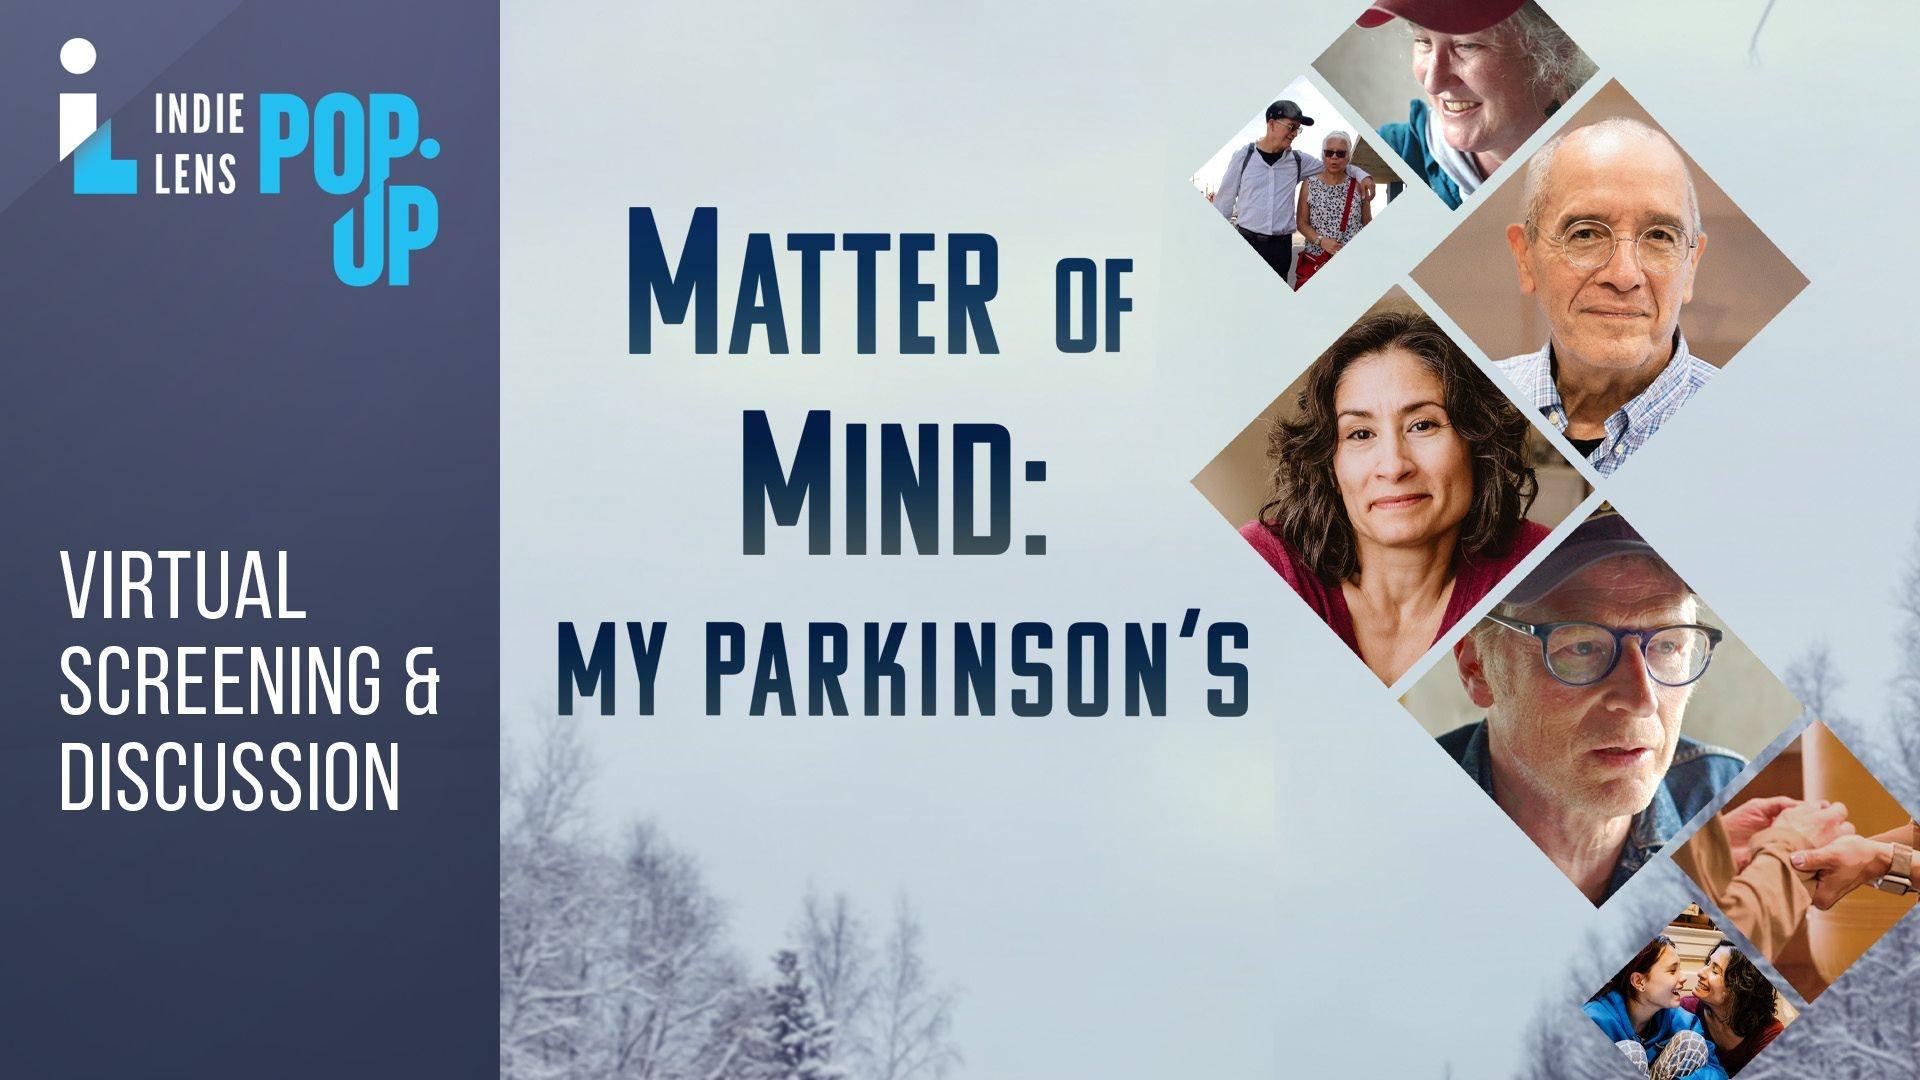 Indie Lens Pop-Up Virtual Screening & Discussion of Matter of Mind: My Parkinson's